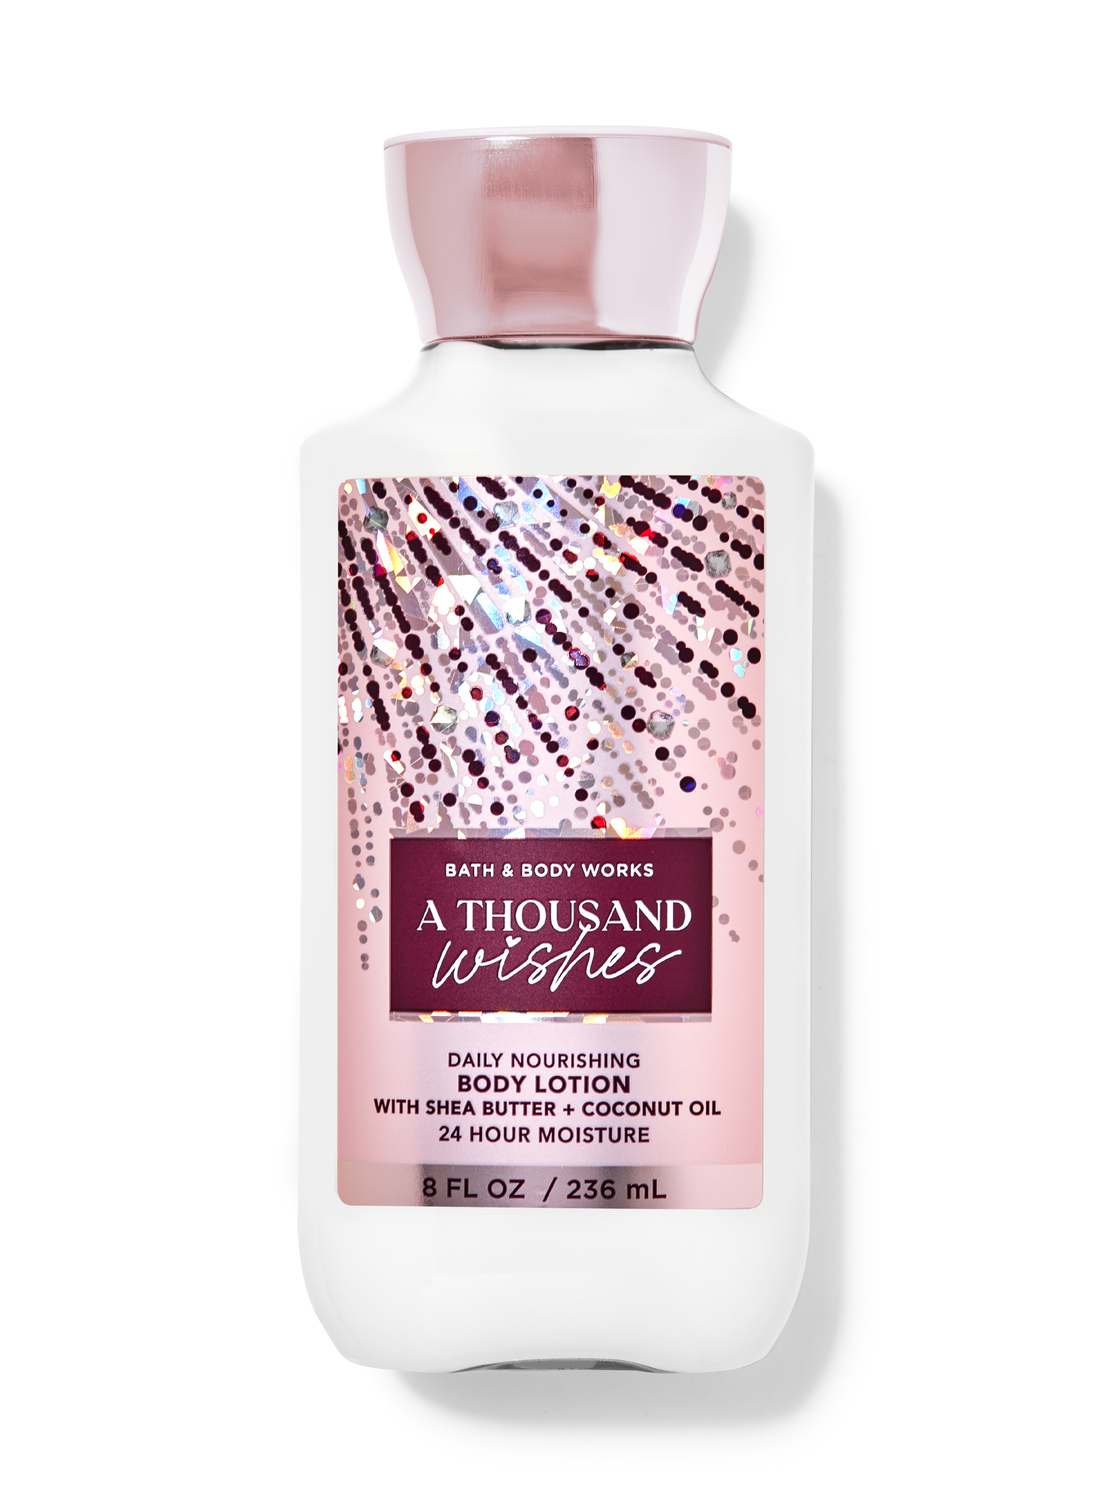 Buy A Thousand Wishes Body Lotion Online Bath And Body Works Philippines 6889